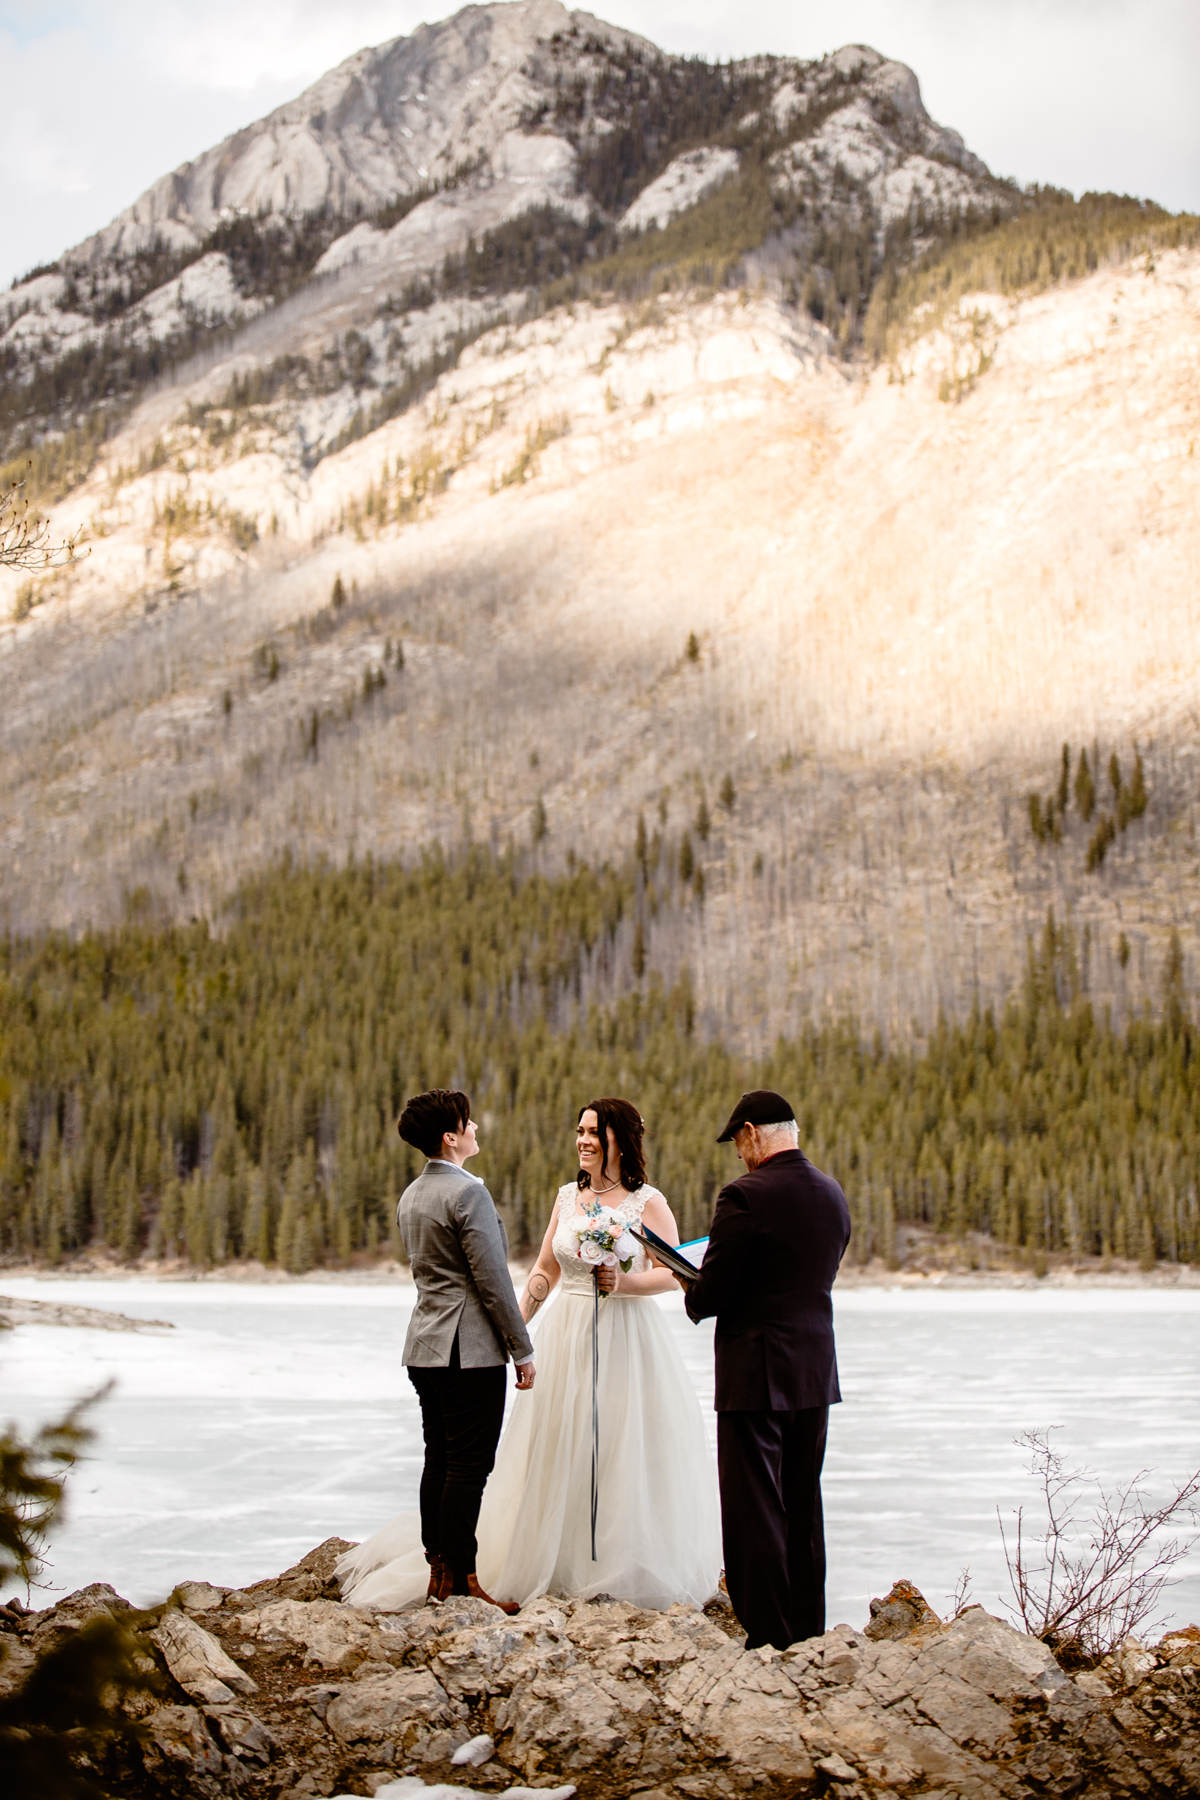 Banff National Park Elopement Photography with LGBTQ-friendly photographers - Image 19